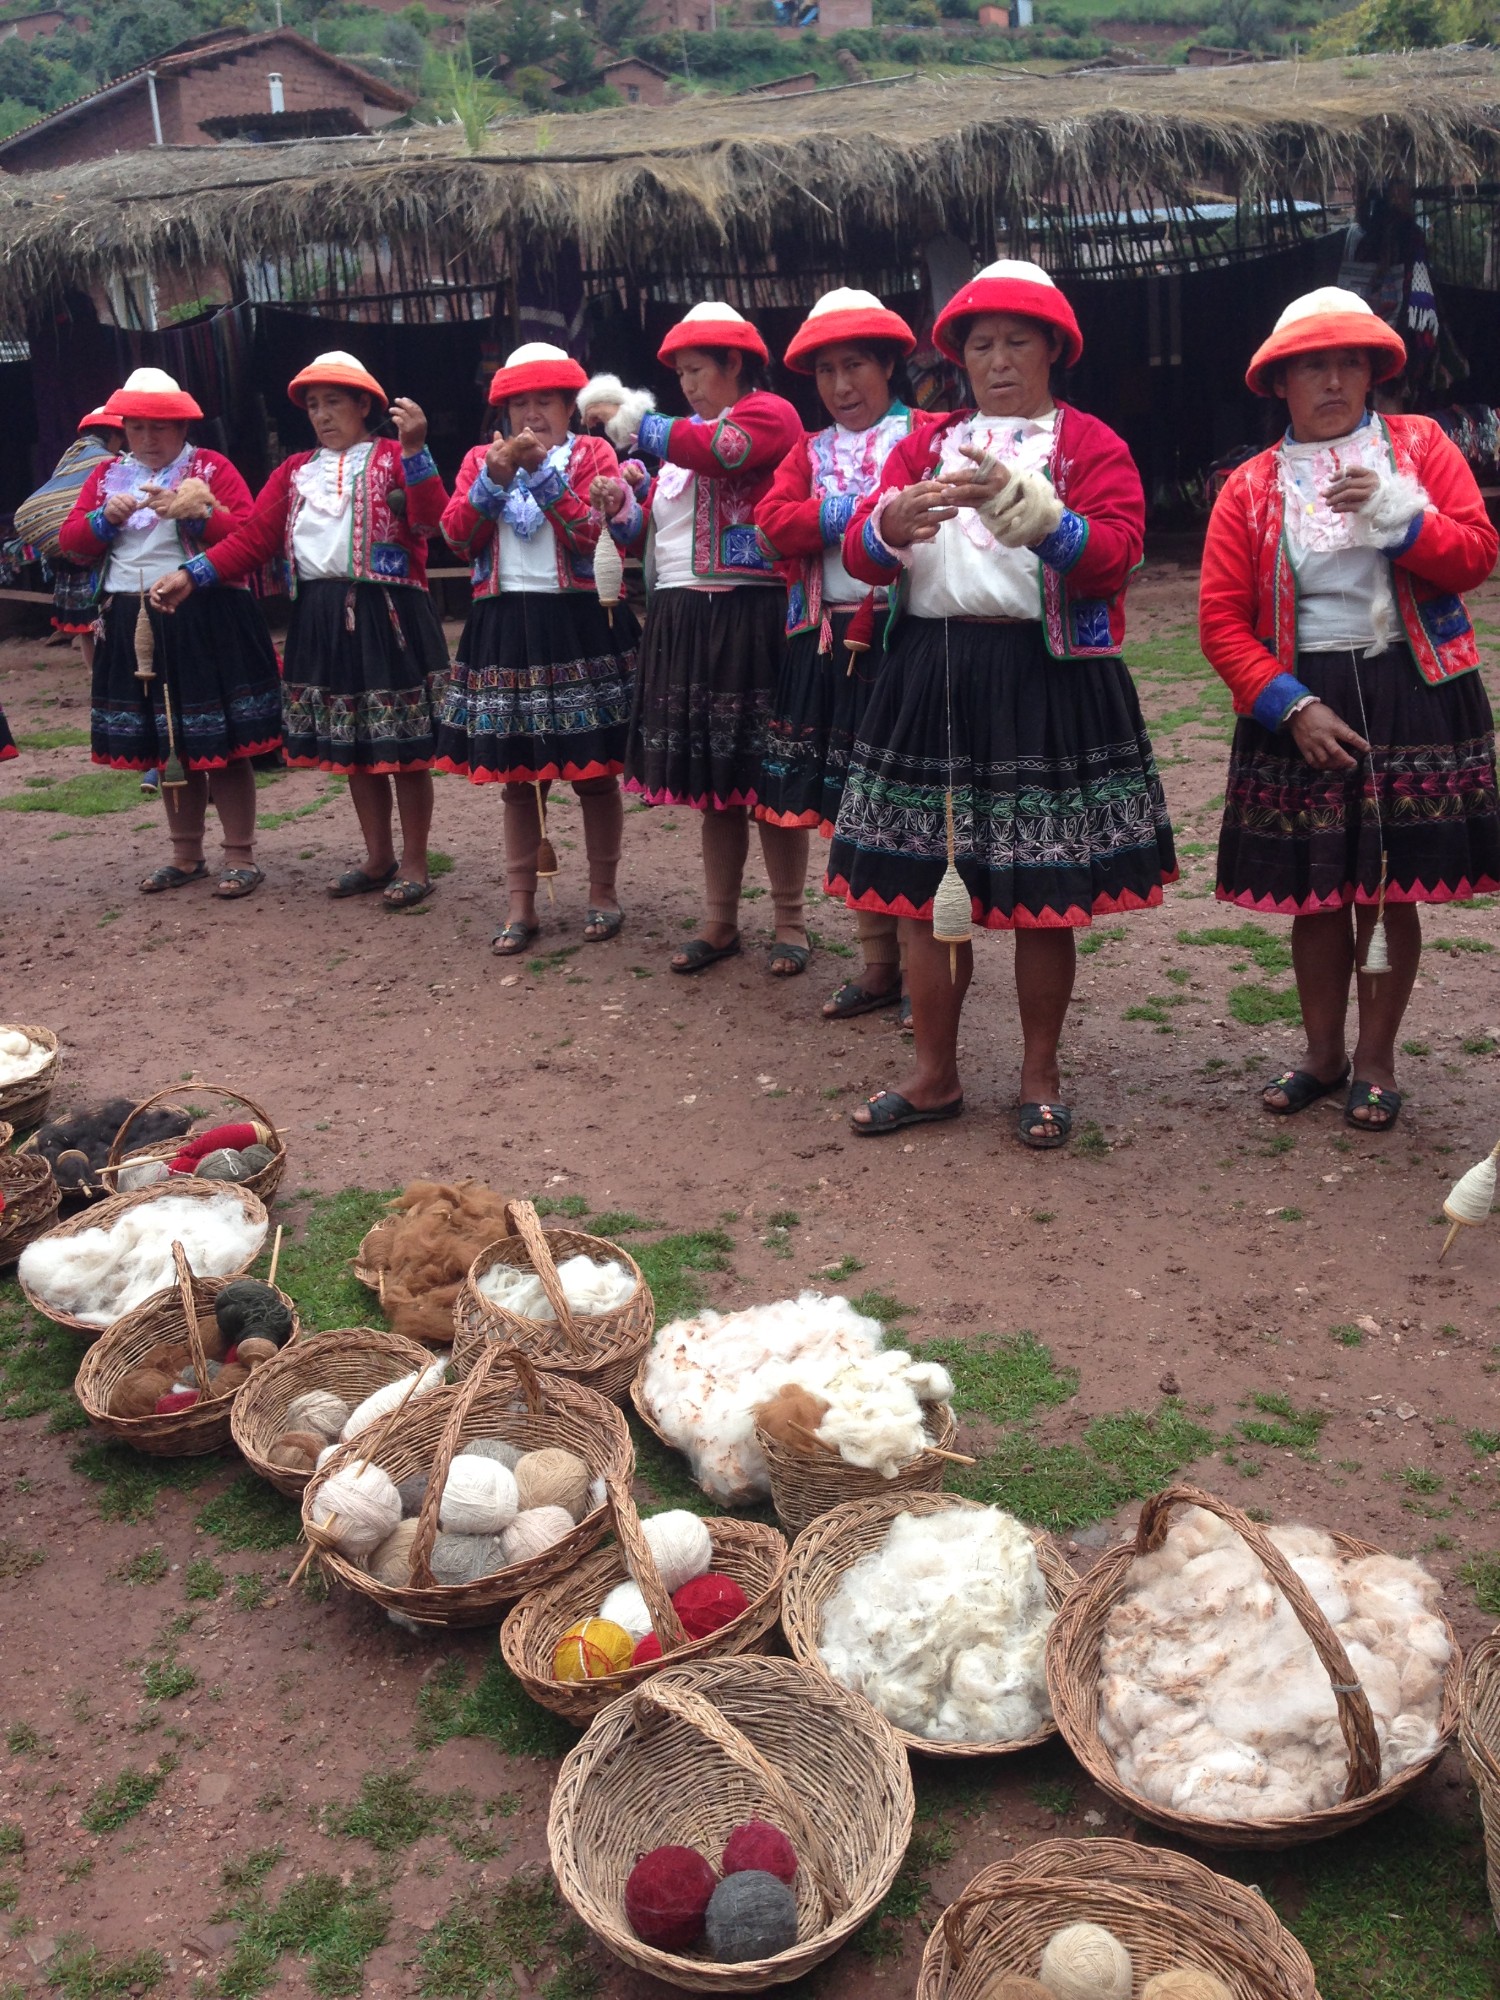 Women of Ccaccaccollo standing together and winding wool, wearing traditional dress